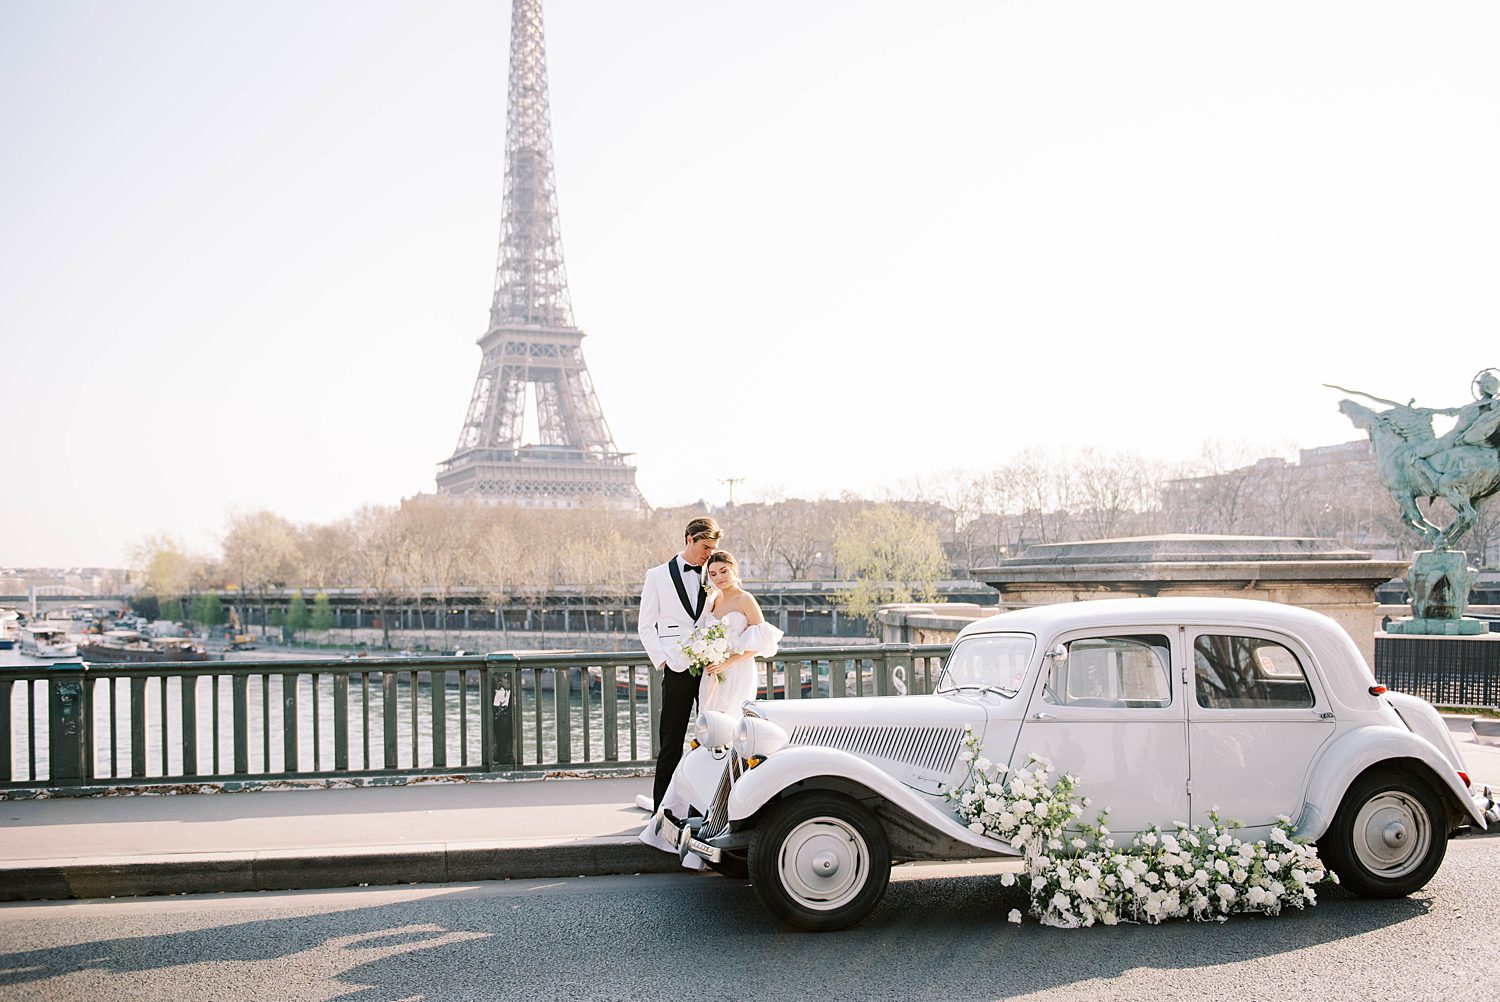 bride and groom pose by antique car by Eiffel Tower